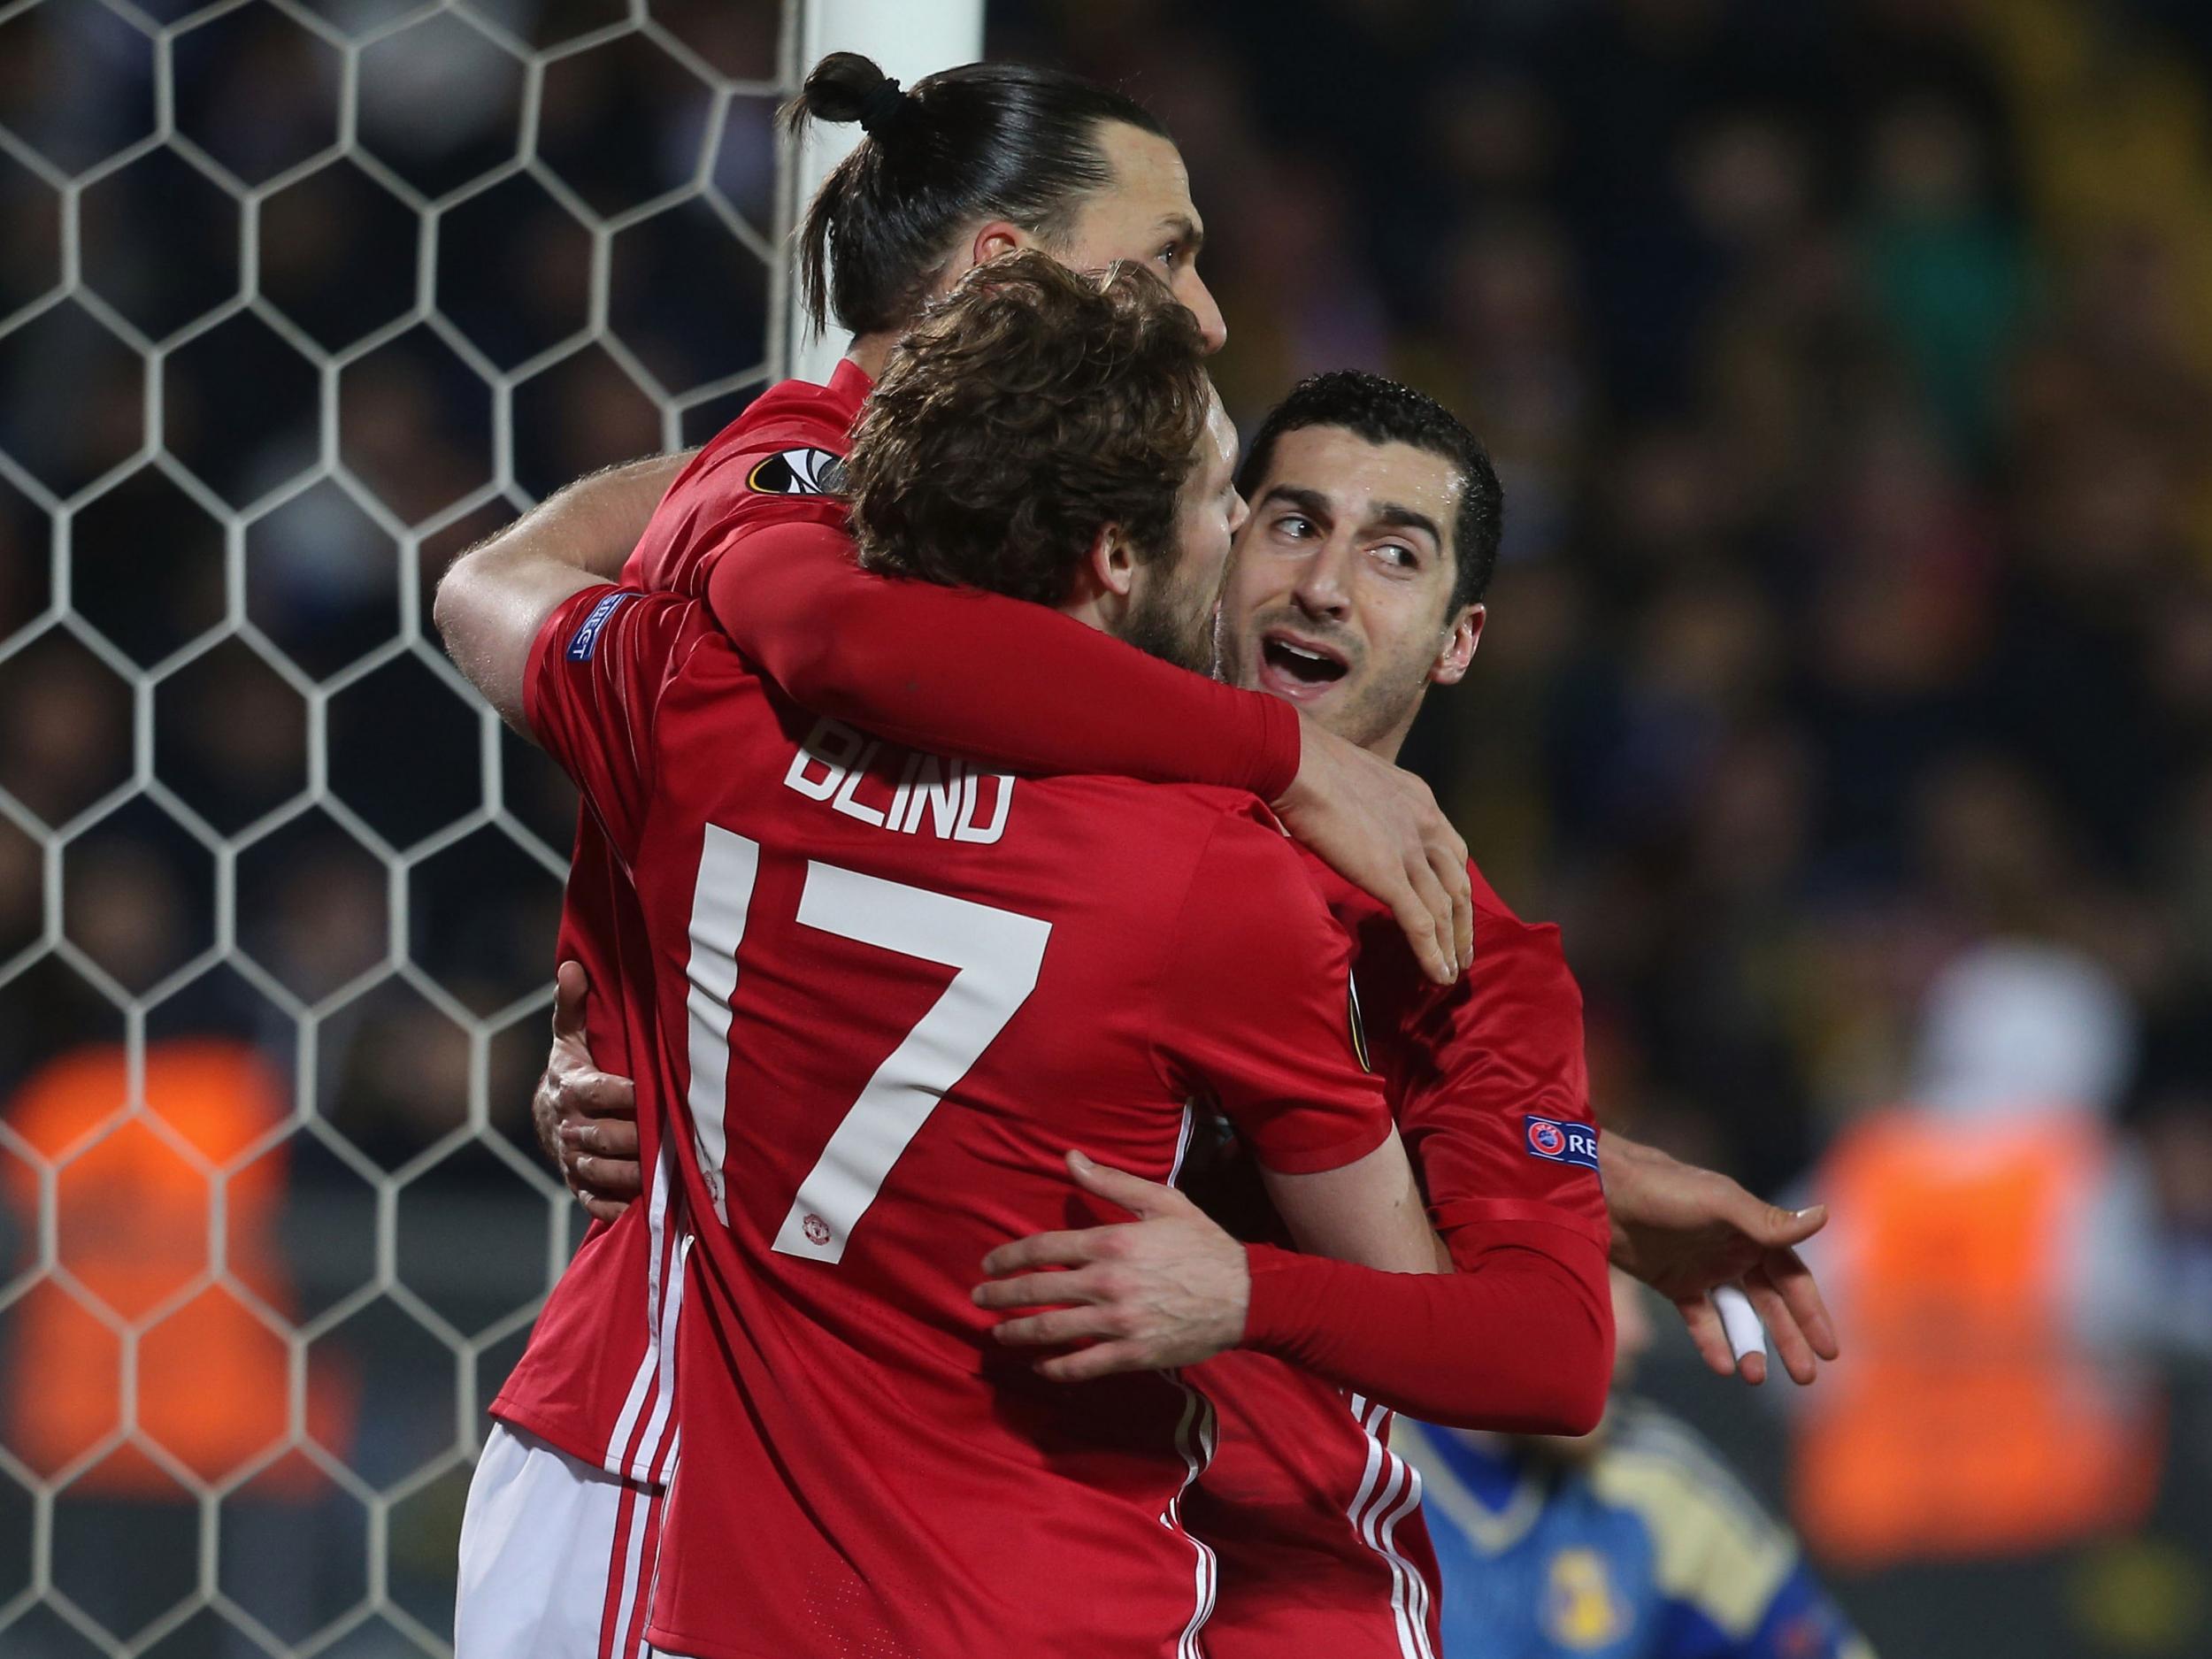 Mkhitaryan is congratulated after opening the scoring